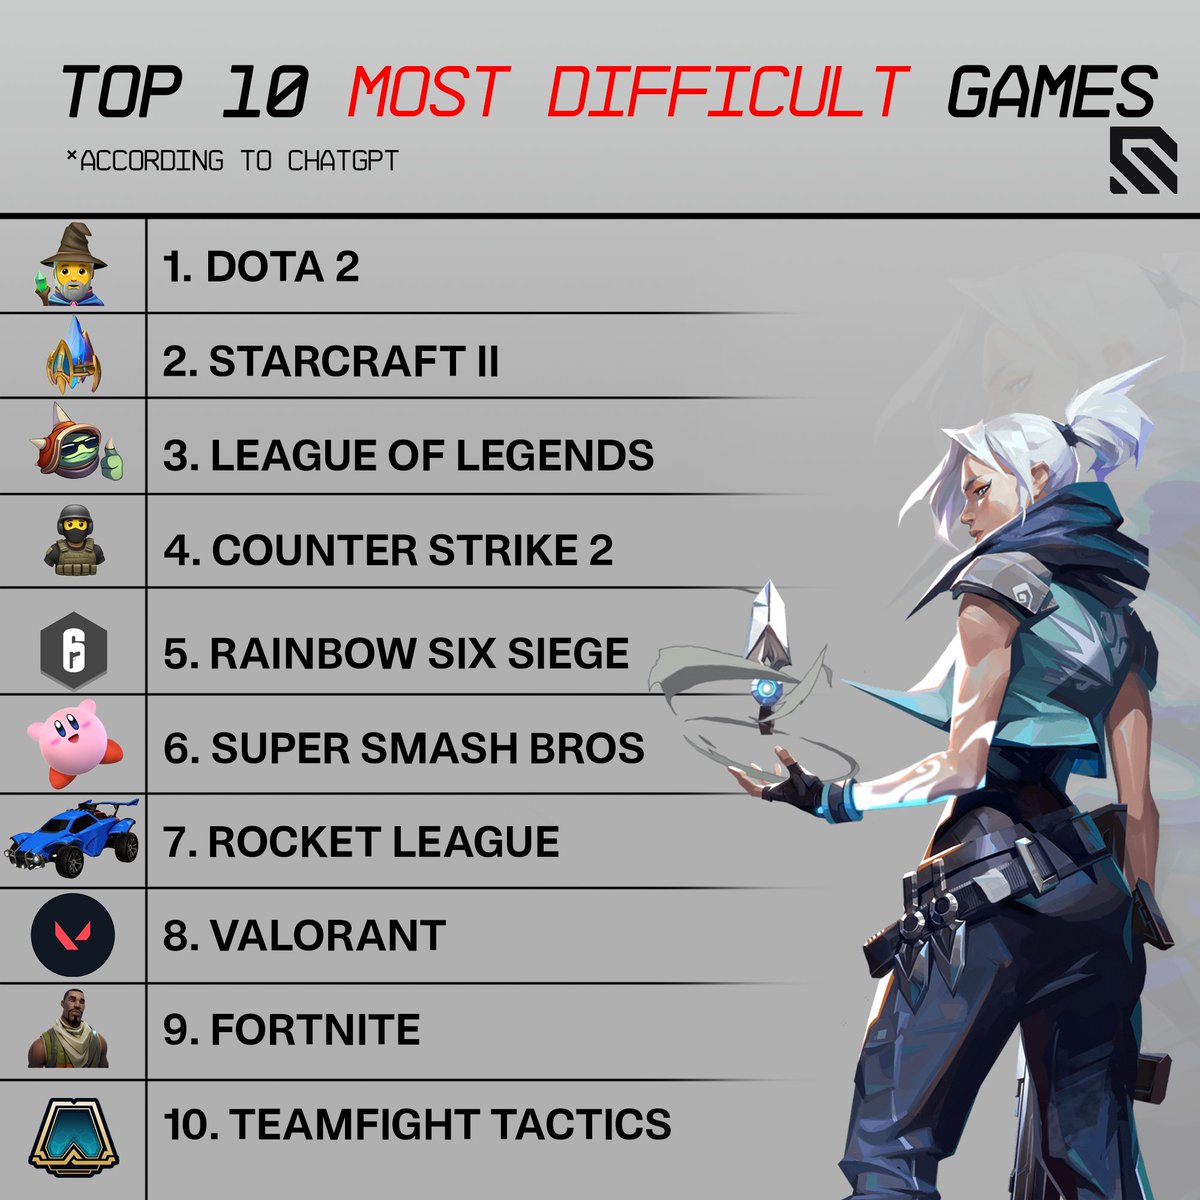 Top 10 most difficult esport games (according to GPT) What do you think?